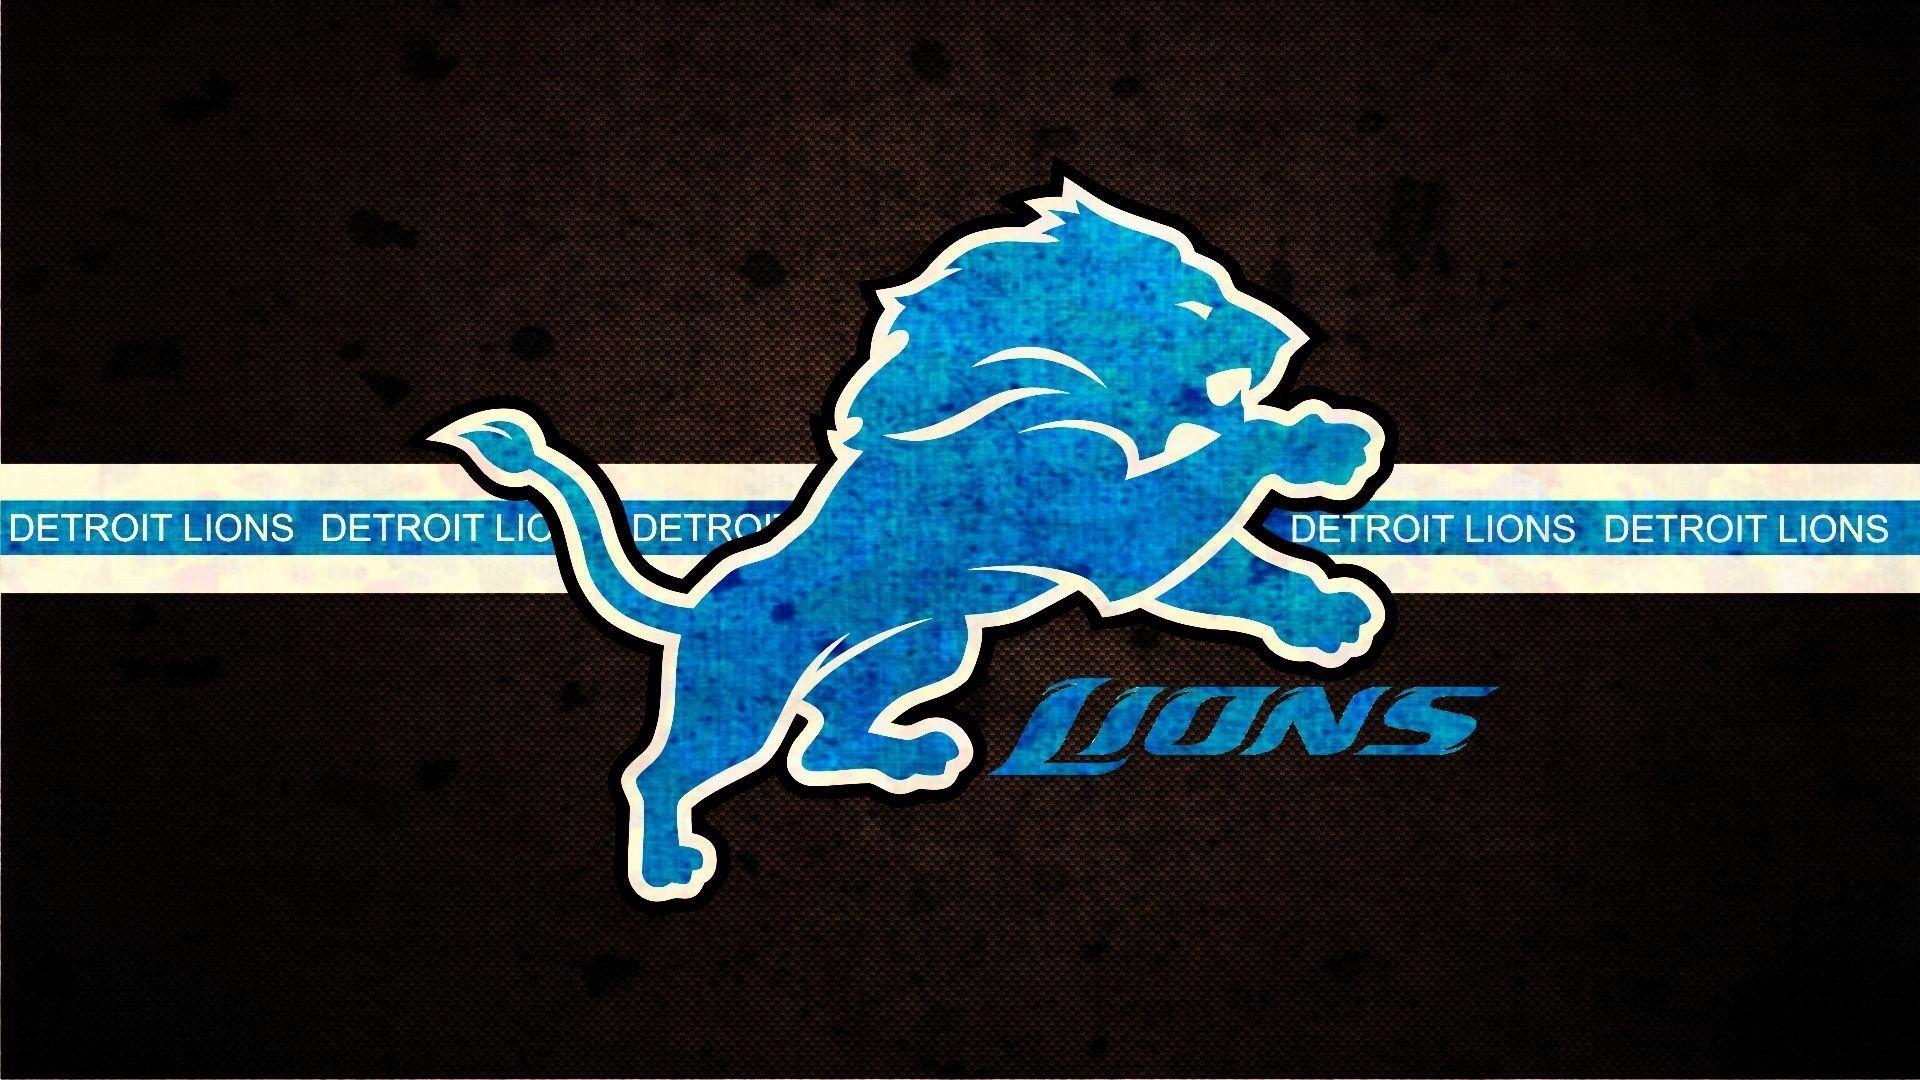 2023 Detroit Lions 2023 NFL Mock Draft Ben Johnson 2.0 Lomas Brown Lions ticket prices Mel Kiper 2023 NFL Draft 2023 Detroit Lions 2023 NFL Schedule Rumor Ty Johnson New York Jets David Montgomery Chicago Bears Chase Young Jared Goff Amon-Ra St. Brown 2023 NFL Top 100